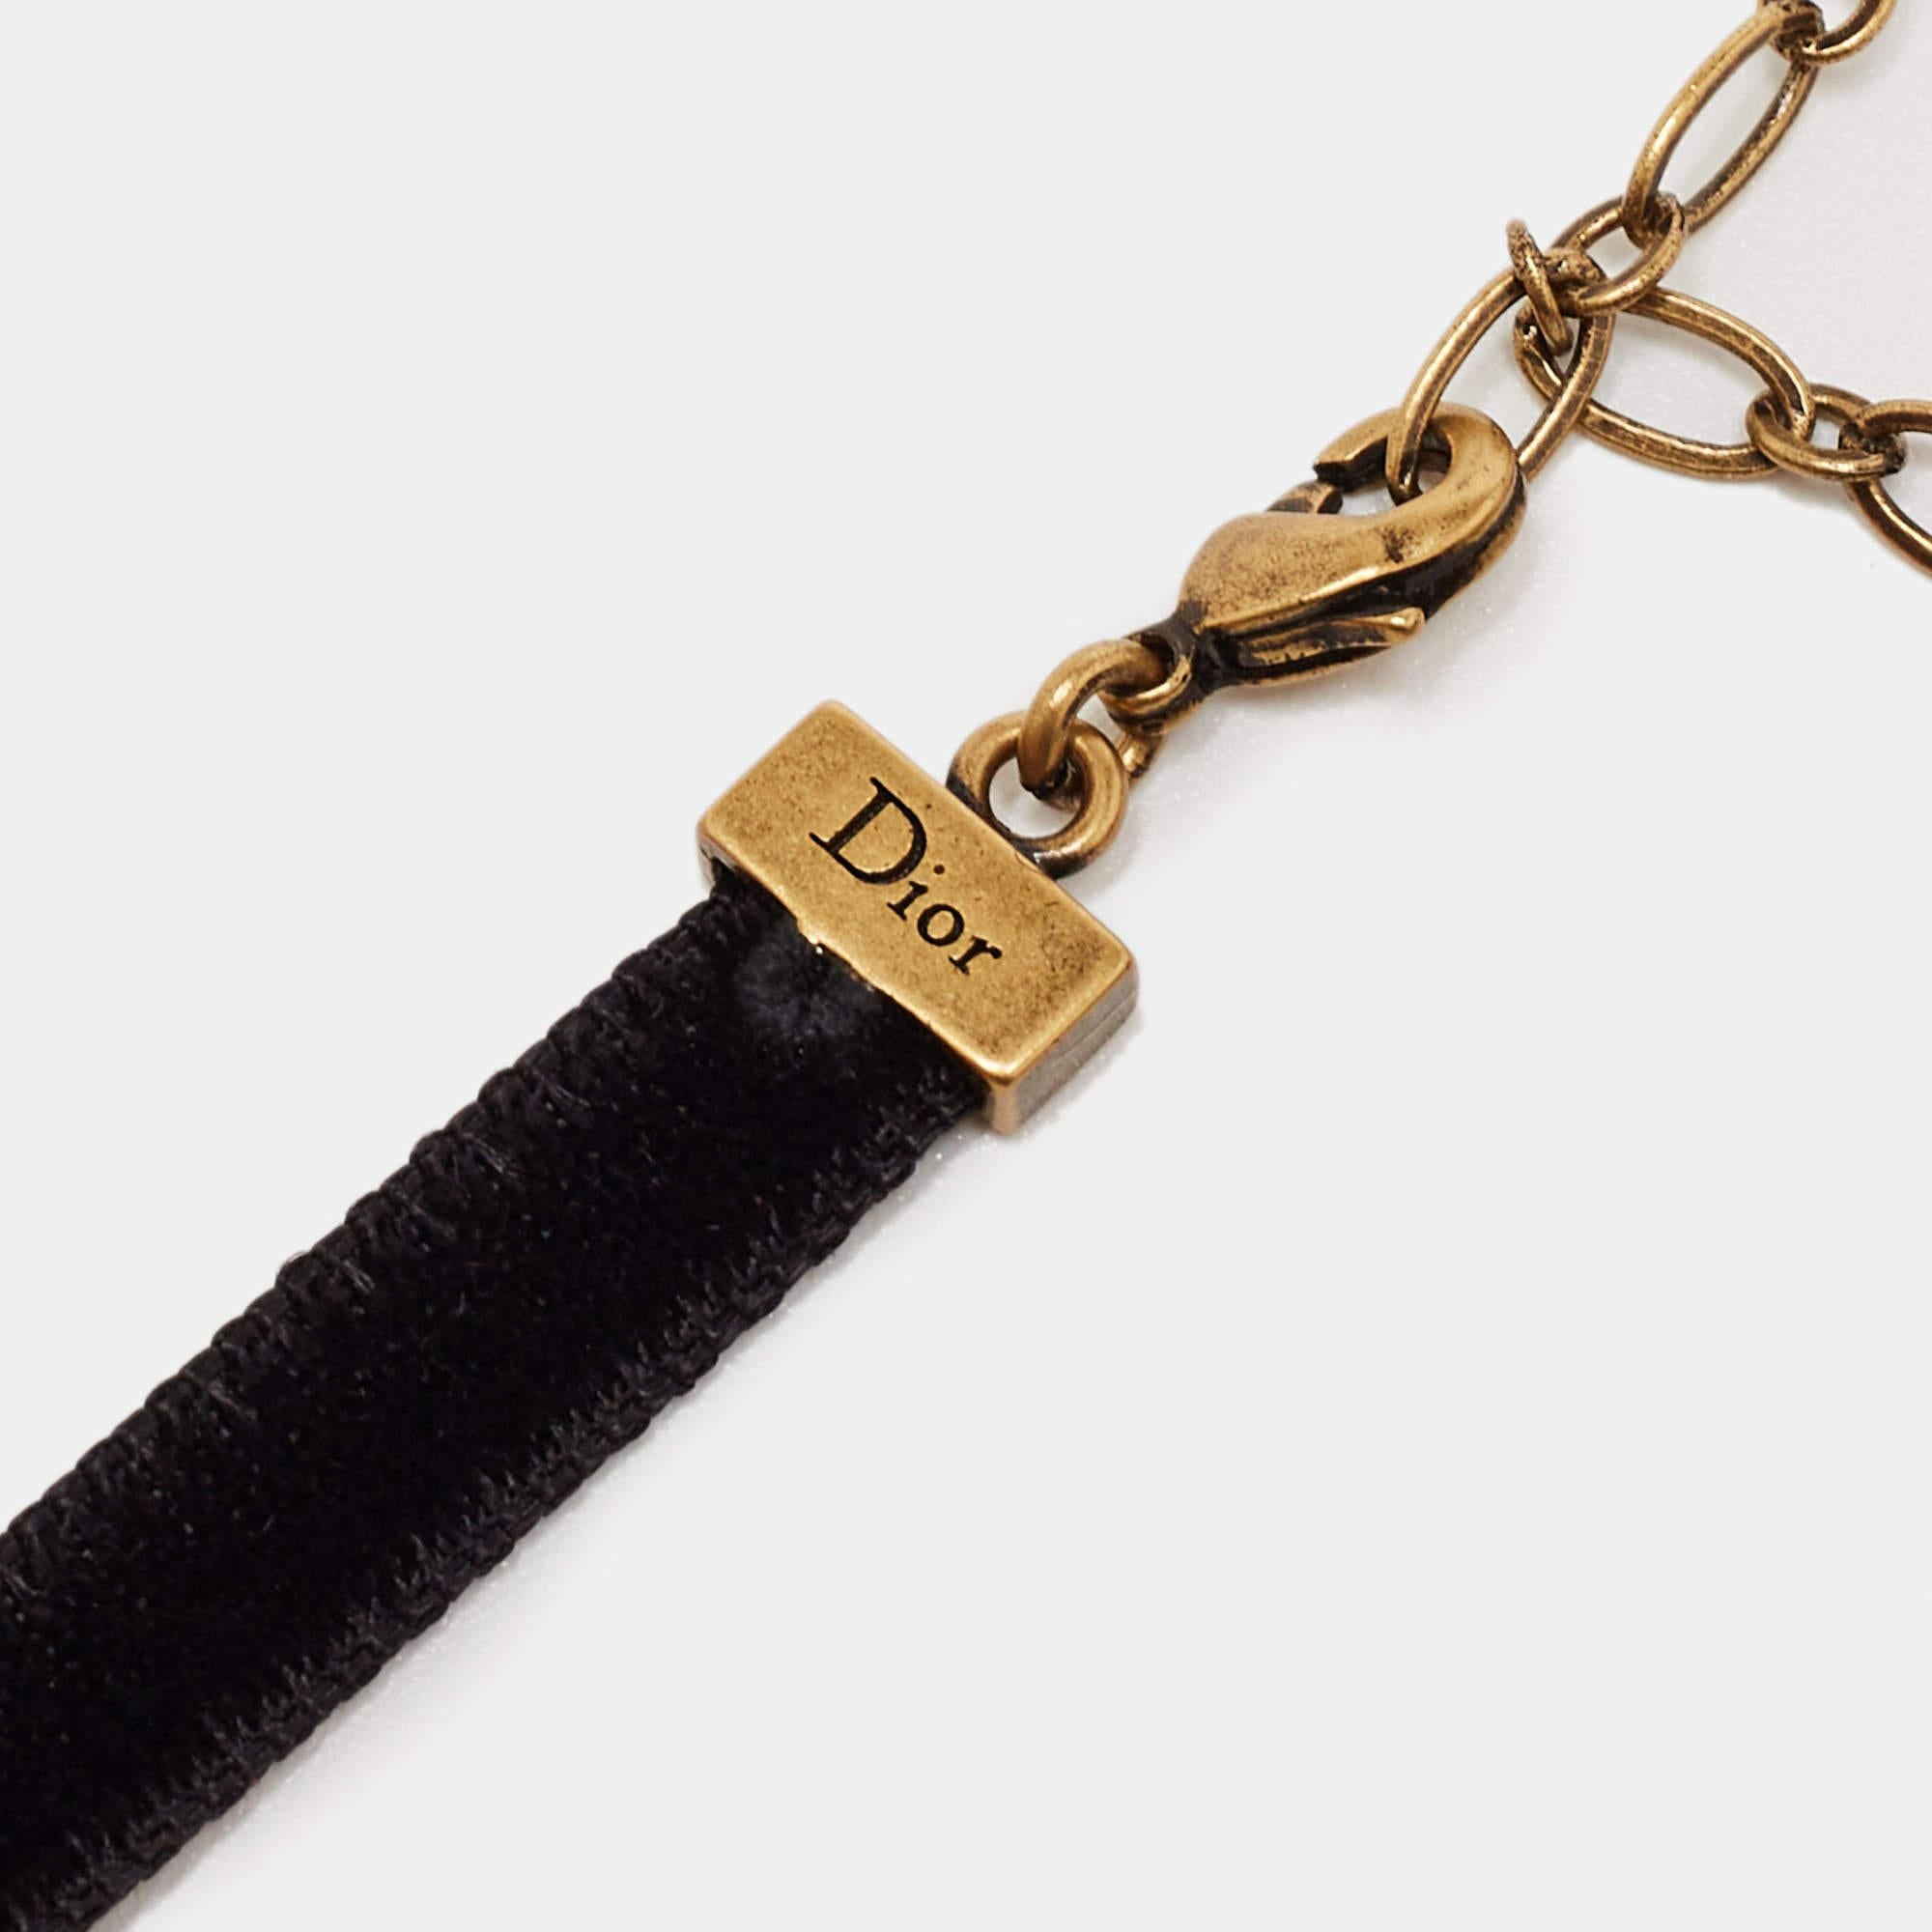 Accessories that are high on style are absolutely worth the buy, such as this choker by Dior. It has been so well assembled with the bee motif in gold-tone metal with crystals while being held by a fabric-tape that has a lobster clasp. The choker